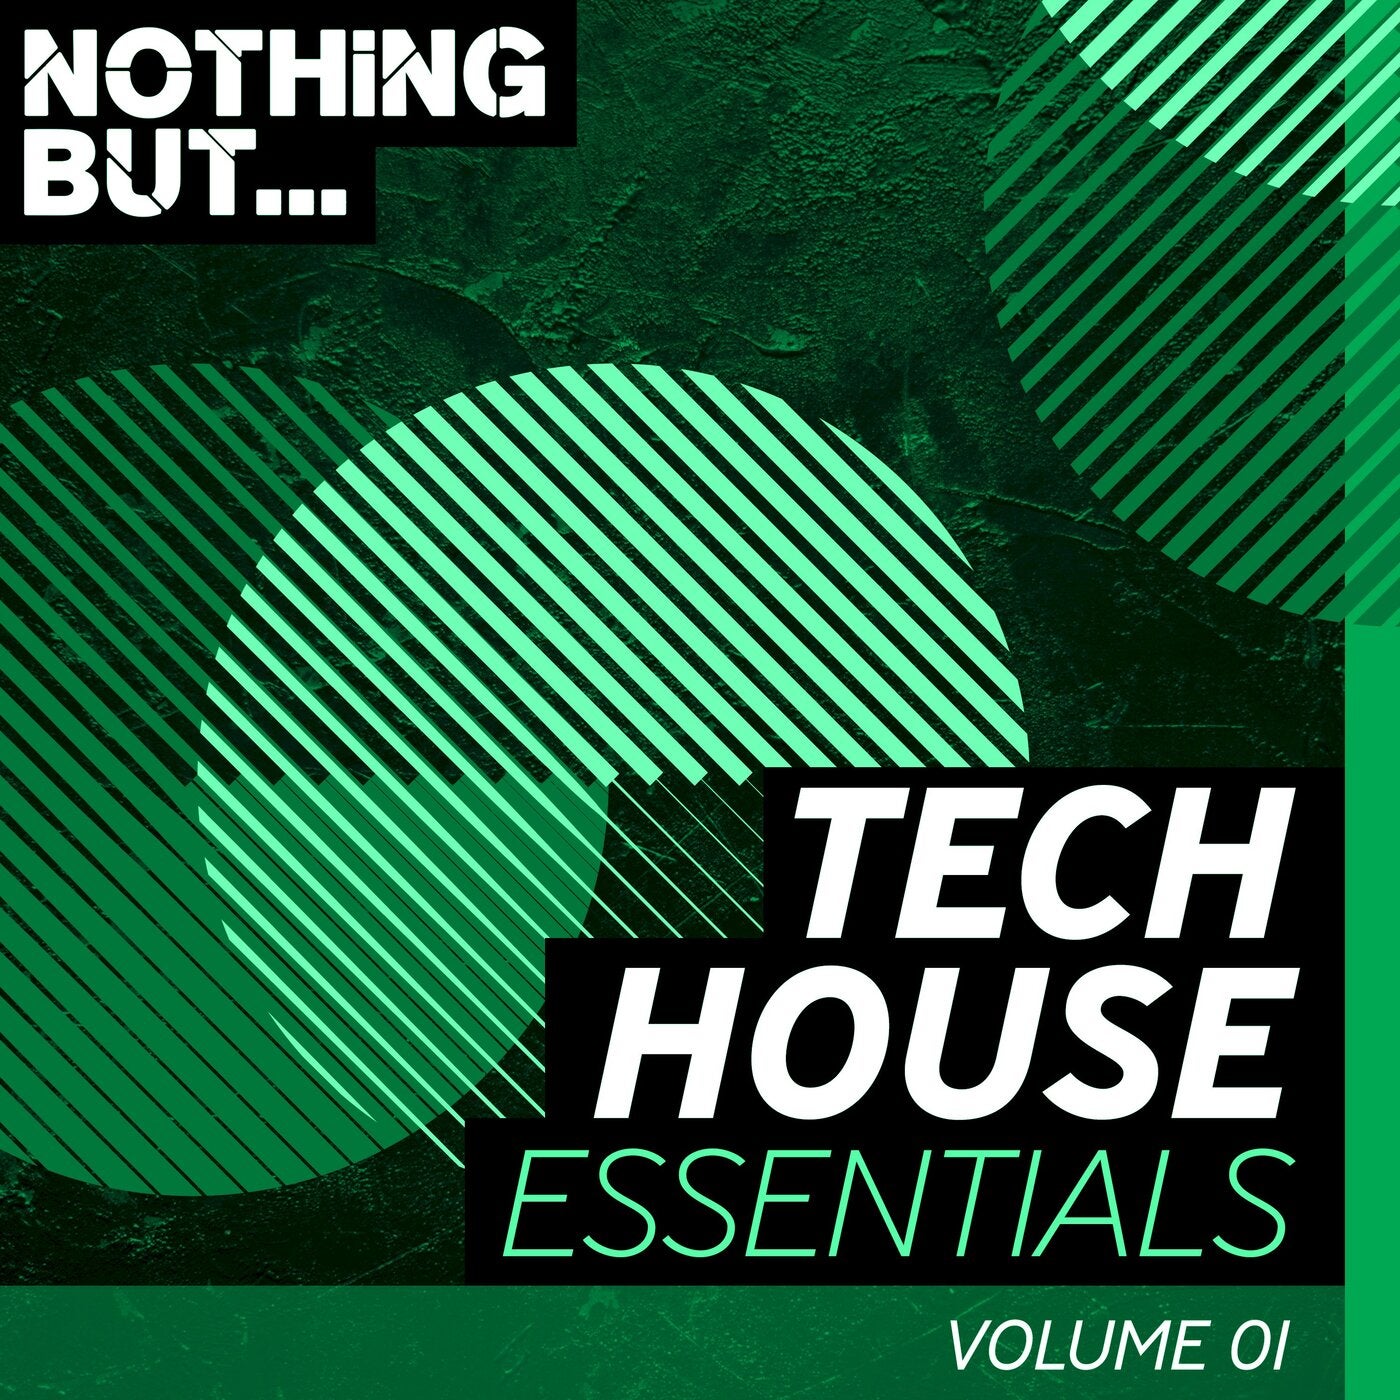 Nothing But... Tech House Selections, Vol. 01